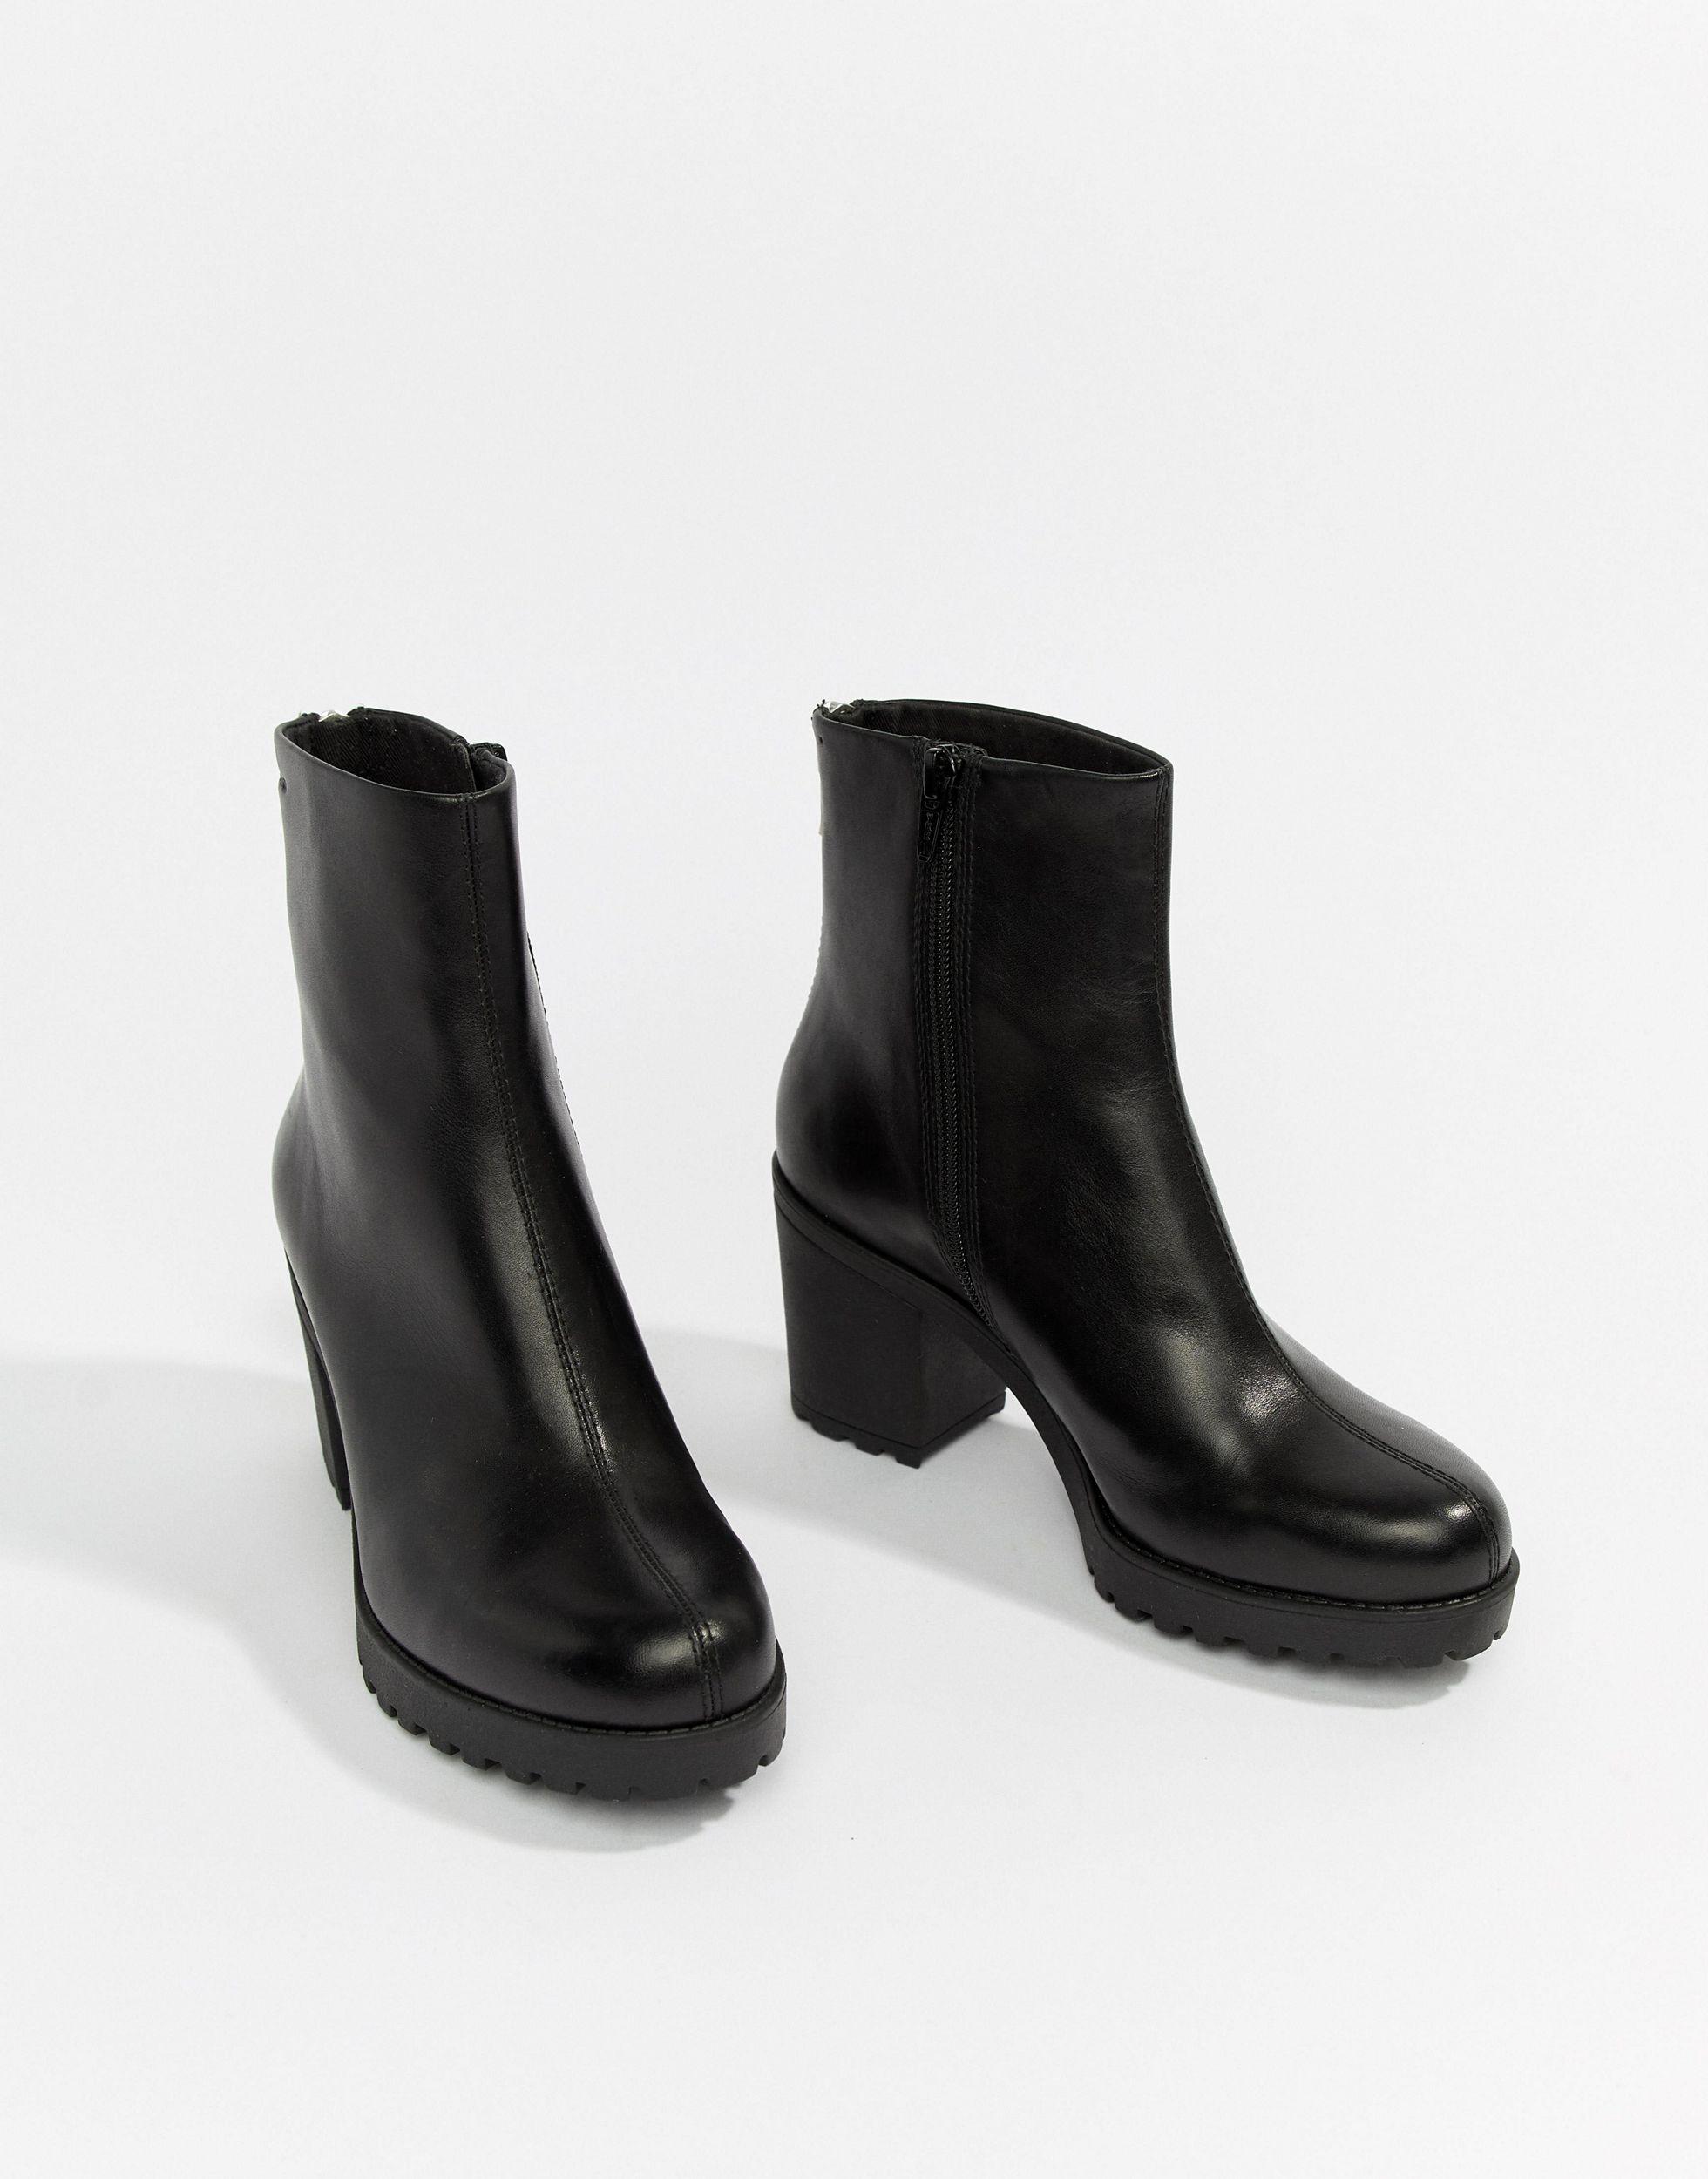 Vagabond Grace Chunky Leather Ankle Boot in Black - Lyst